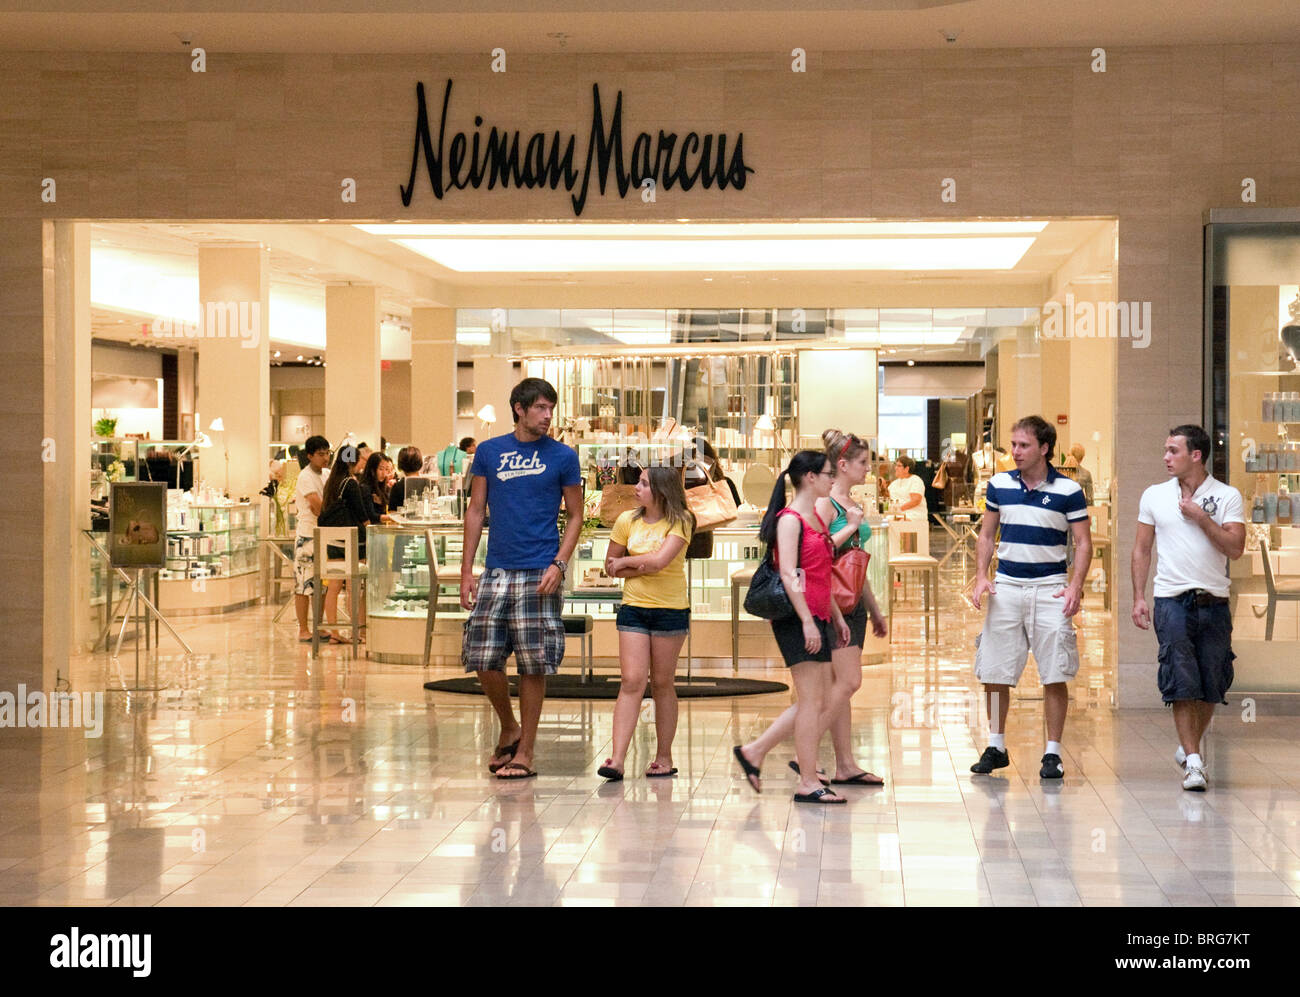 Neiman Marcus' new store within a store - Las Vegas Weekly